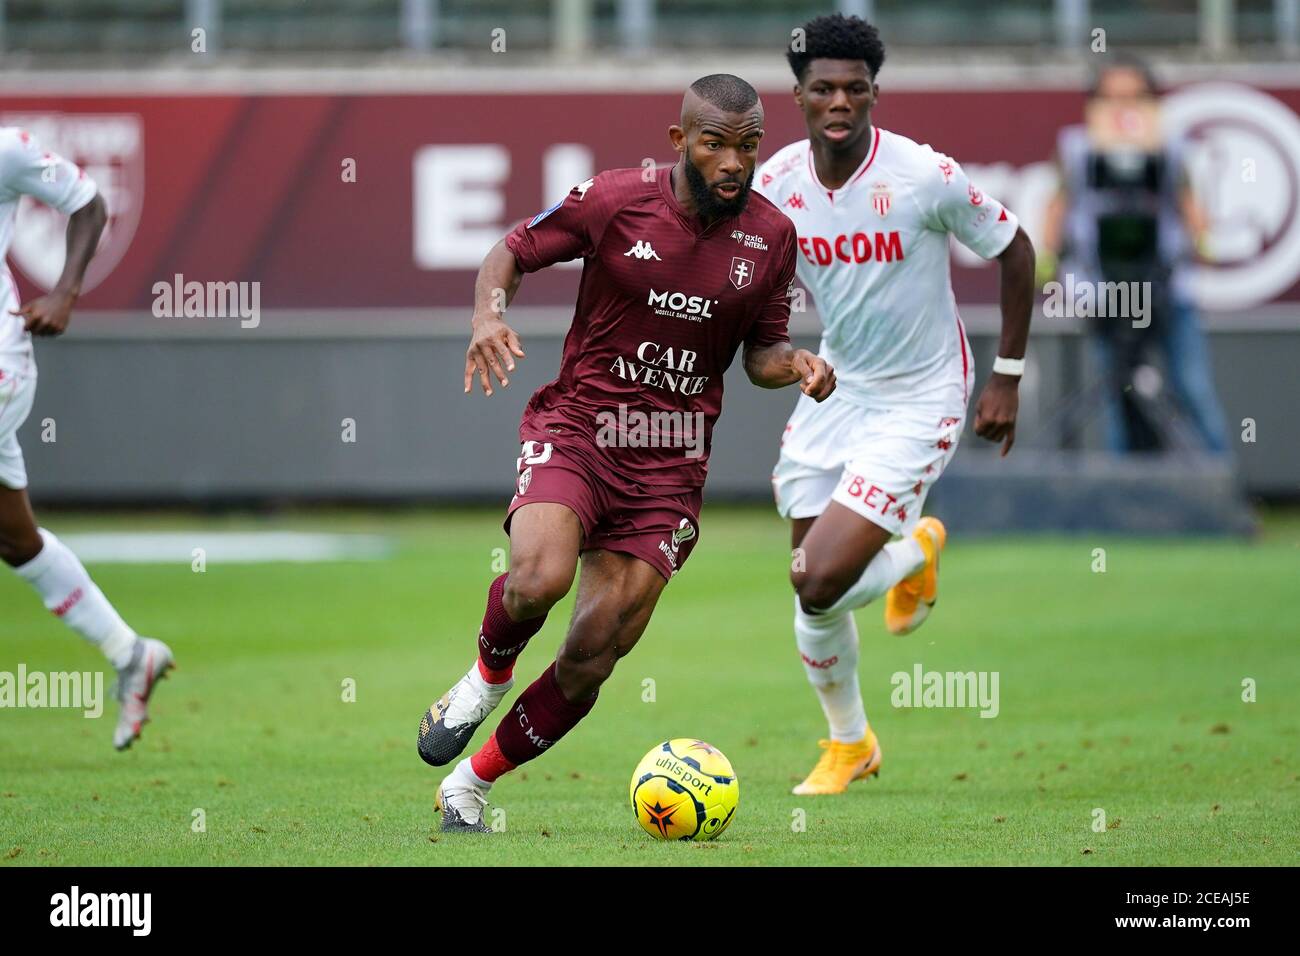 METZ, FRANCE - AUGUST 30: Digbo Gnampa Habib Maiga of Metz during the match  between FC Metz and AS Monaco on August 30, 2020 in Metz, The Netherlands.  *** Local Caption ***